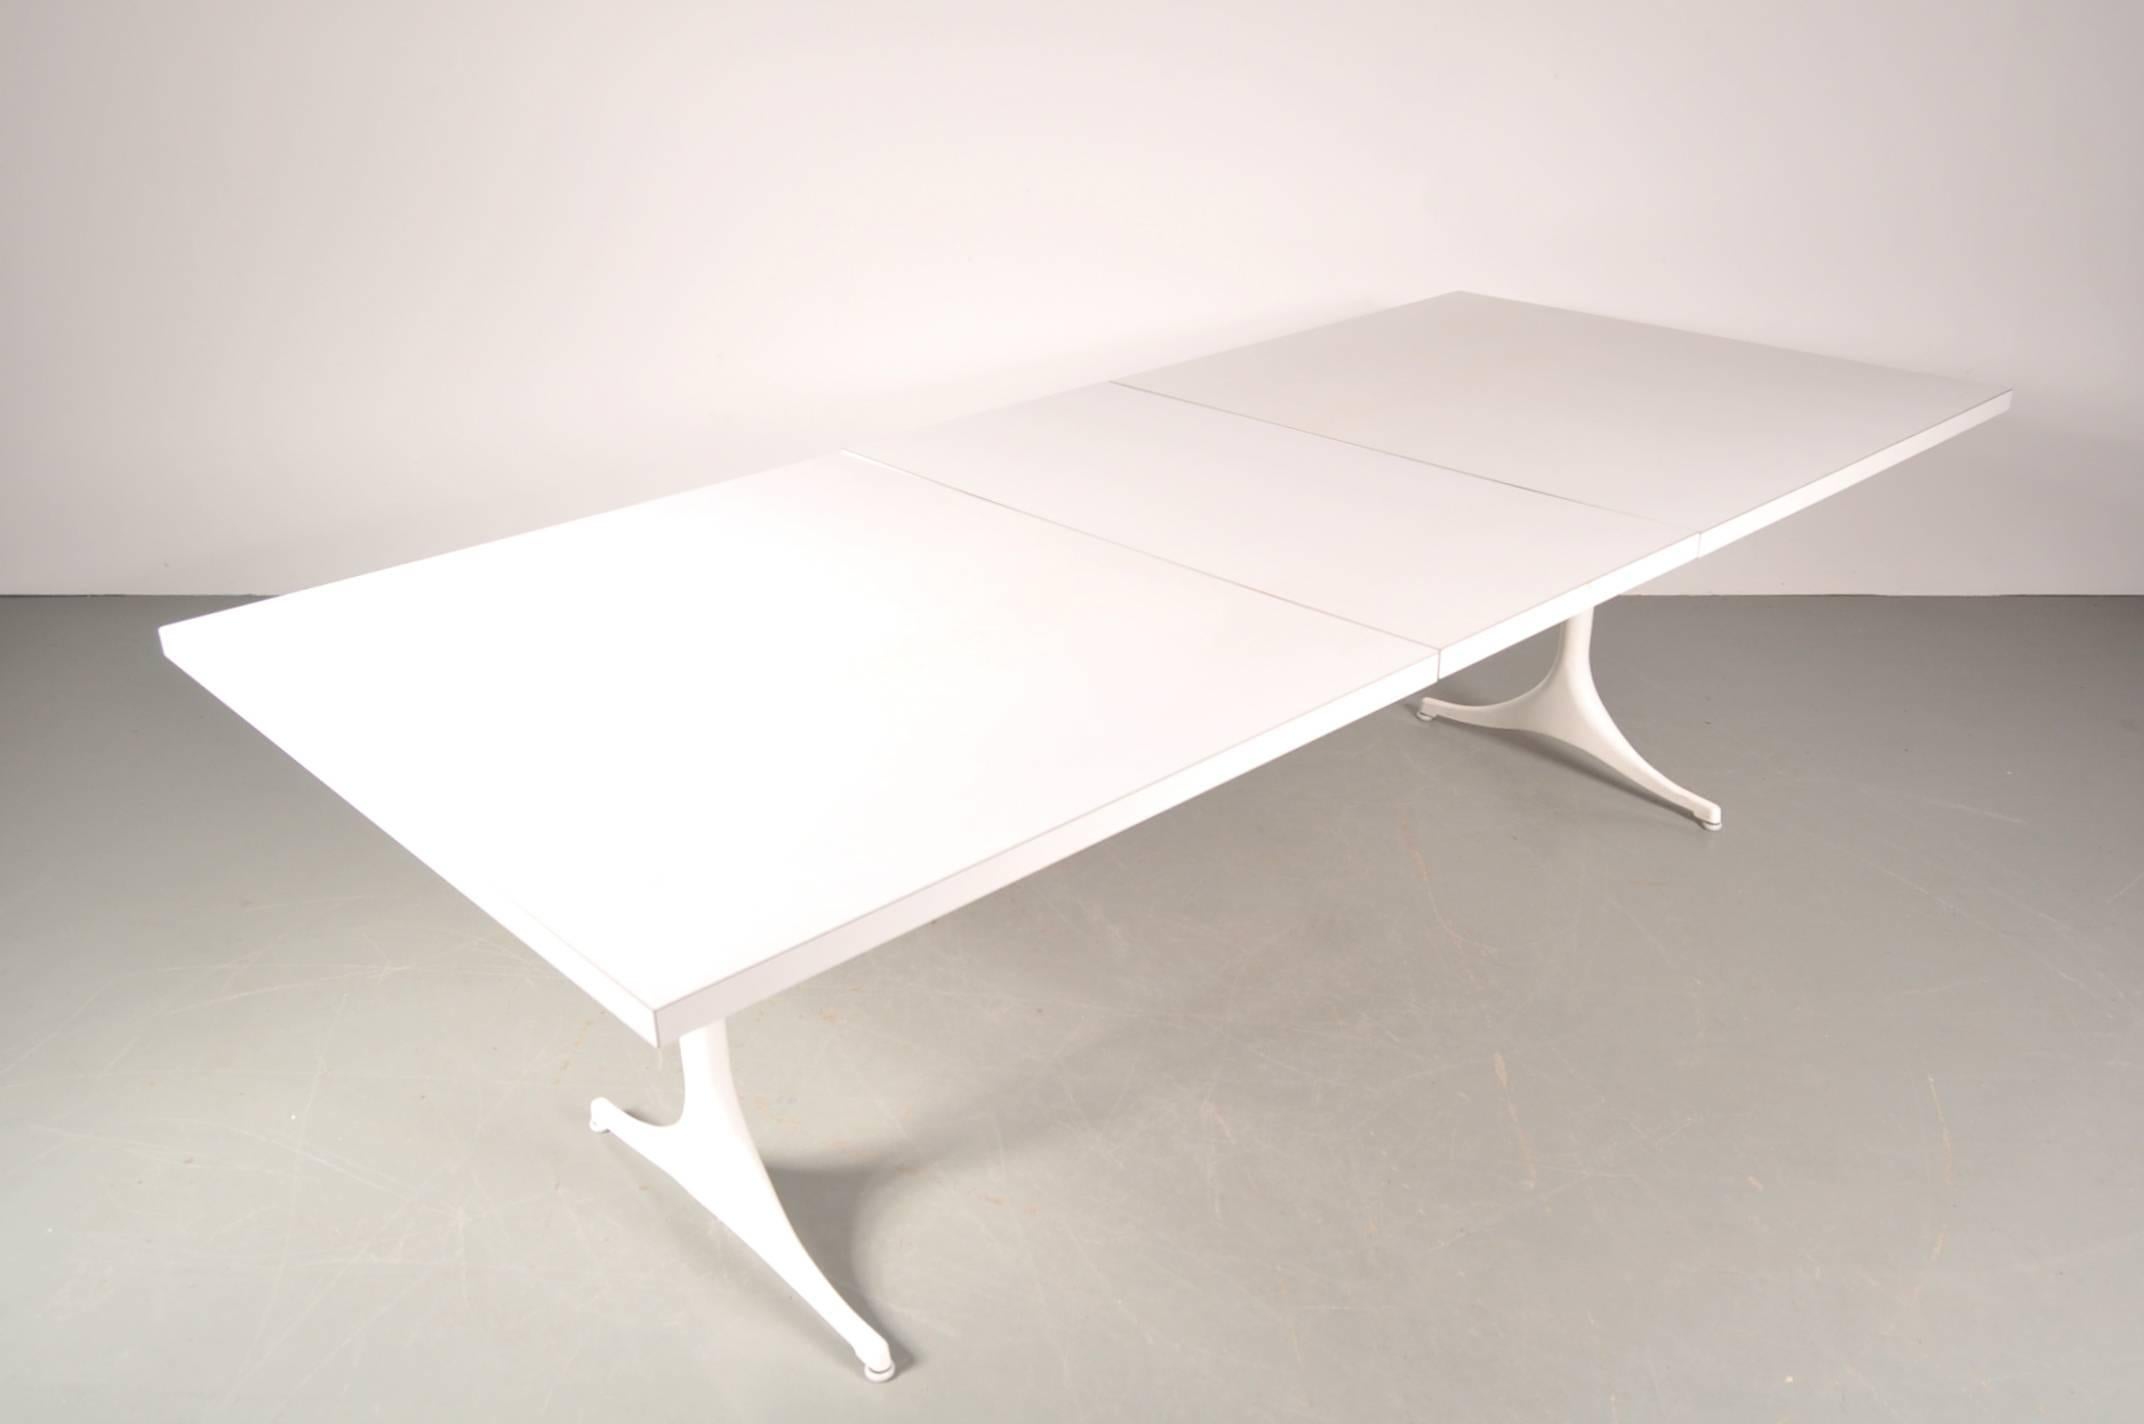 Beautiful dining table designed by George Nelson, manufactured by Herman Miller in the USA, circa 1960.

The table is made of the highest quality white coated aluminium with a well-crafted white laminated wooden top. It has two inlay tops, making